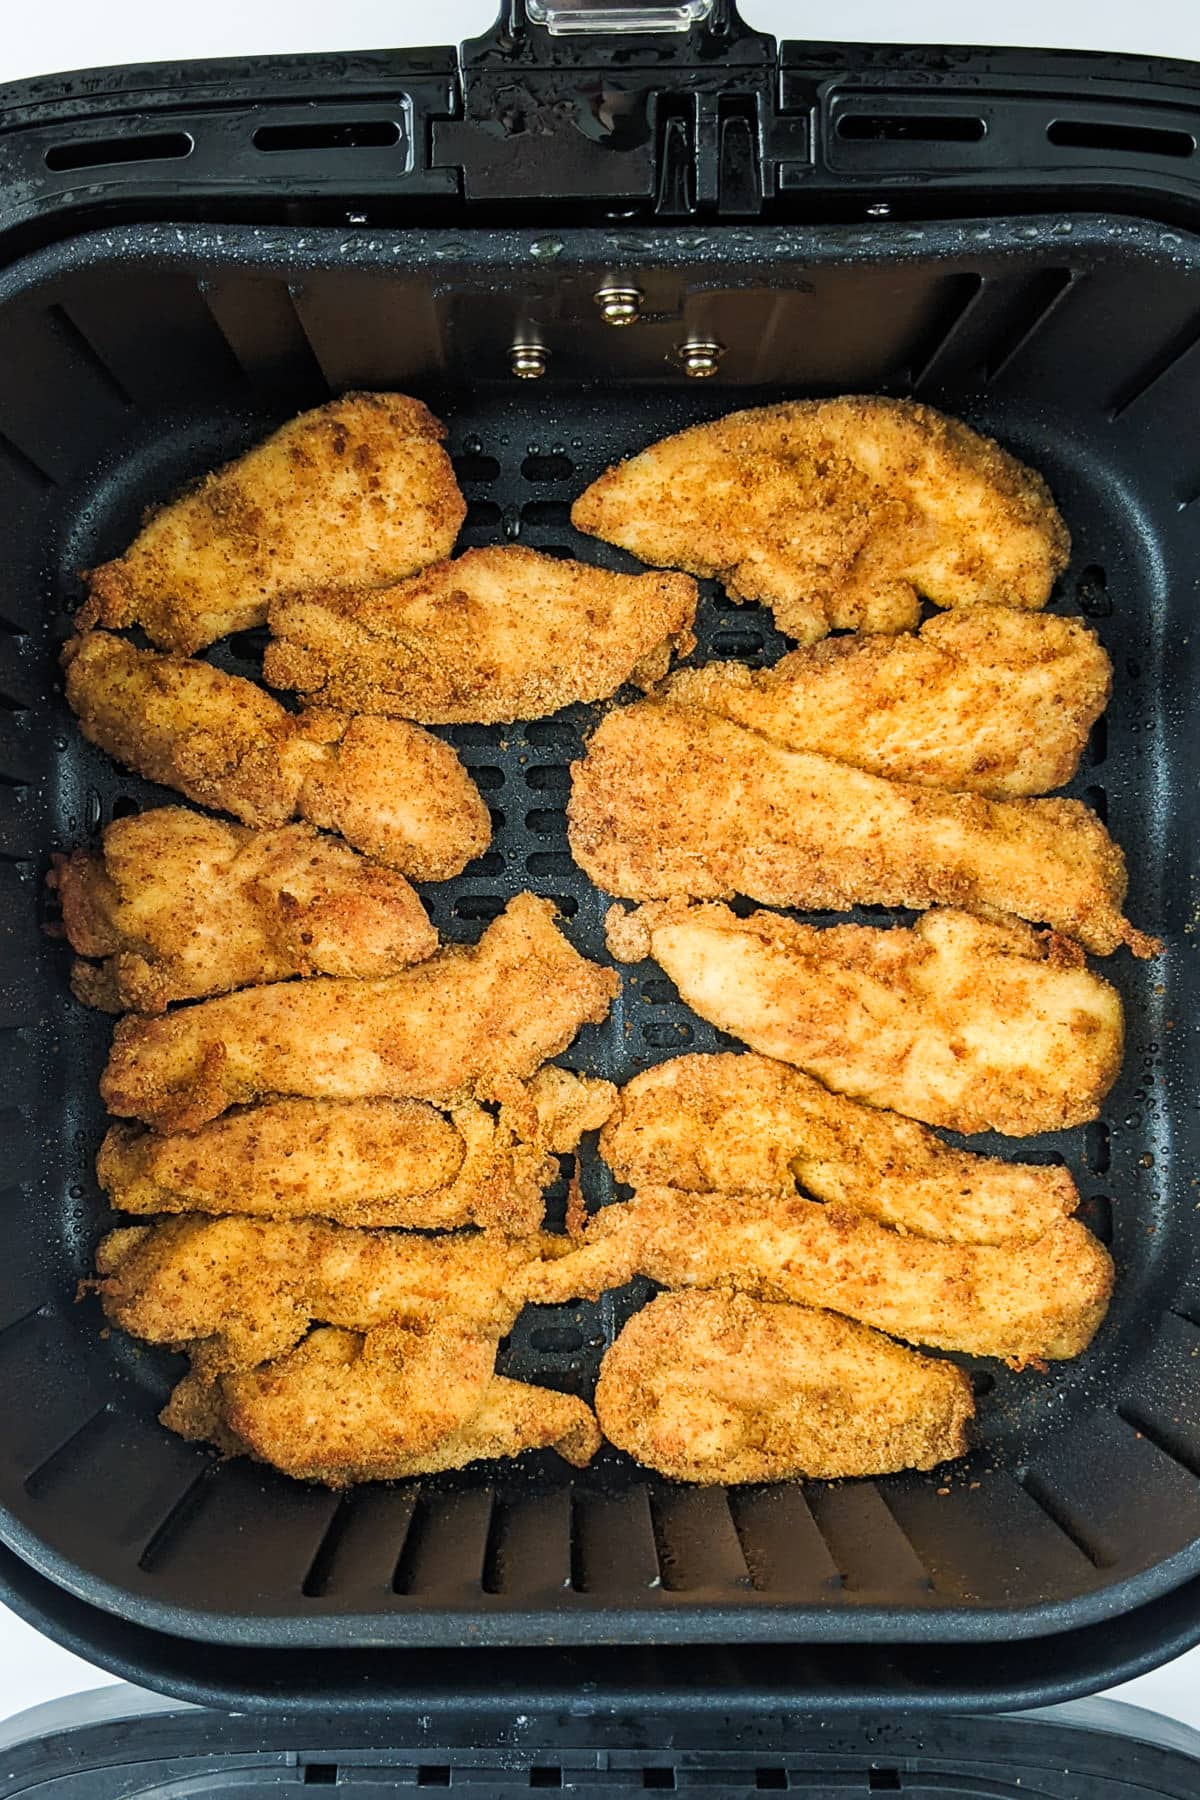 Top view of fried chicken strips in the air fryer basket.